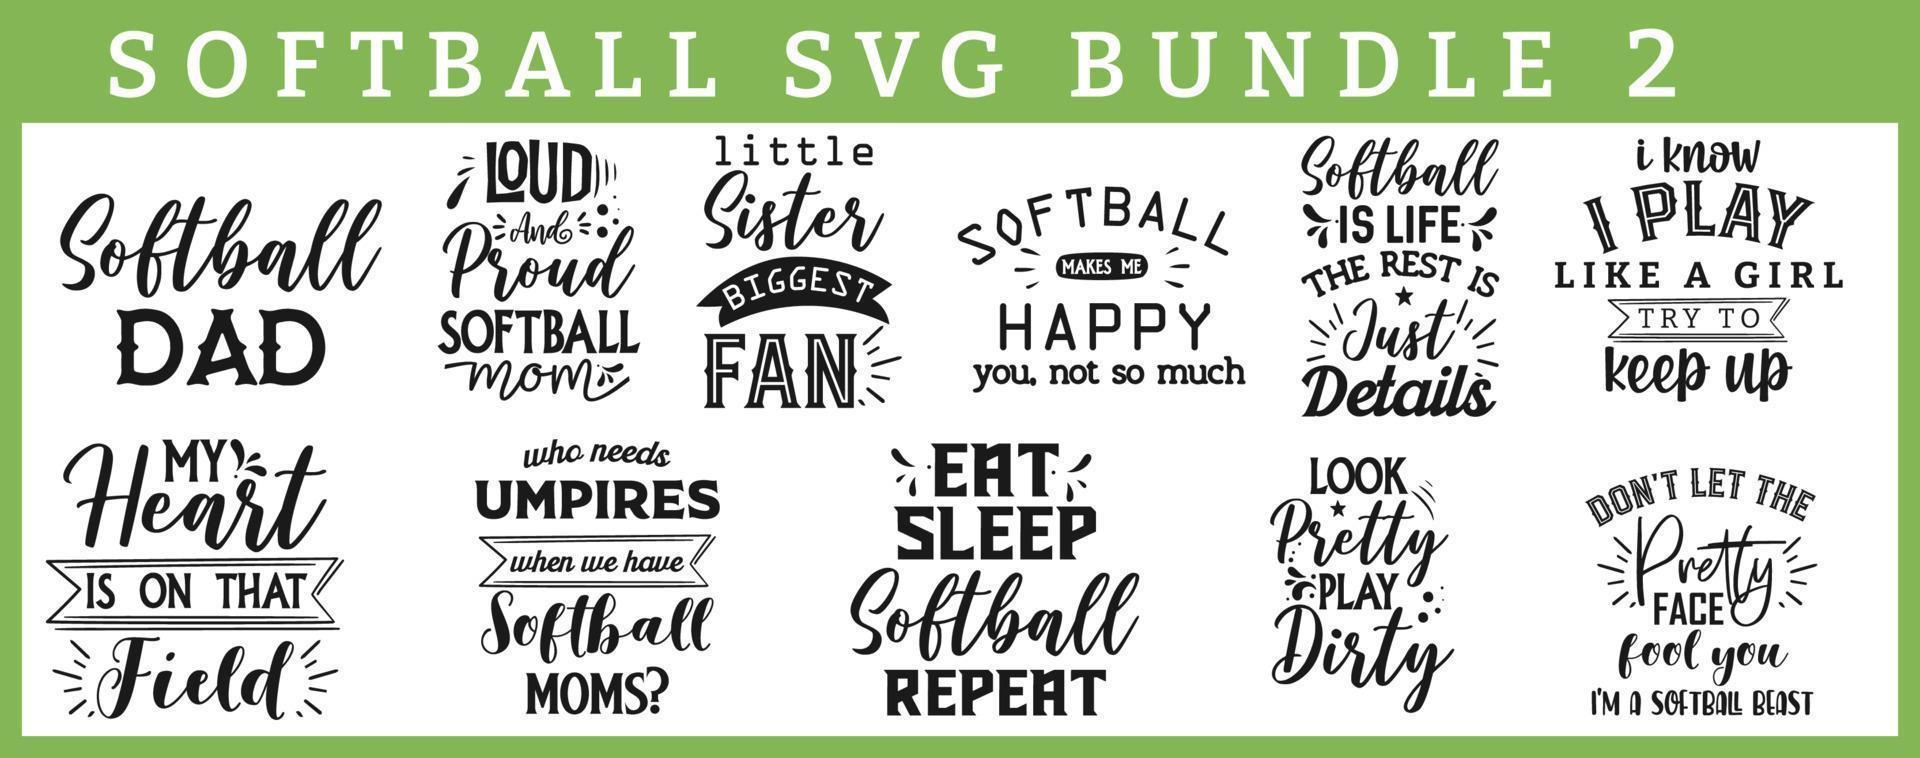 Softball Inspiration SVG Bundle Hand Drawn Typography Quotes and Sayings with Vector Illustration Graphic Perfect for T-Shirts Banners Mugs and More